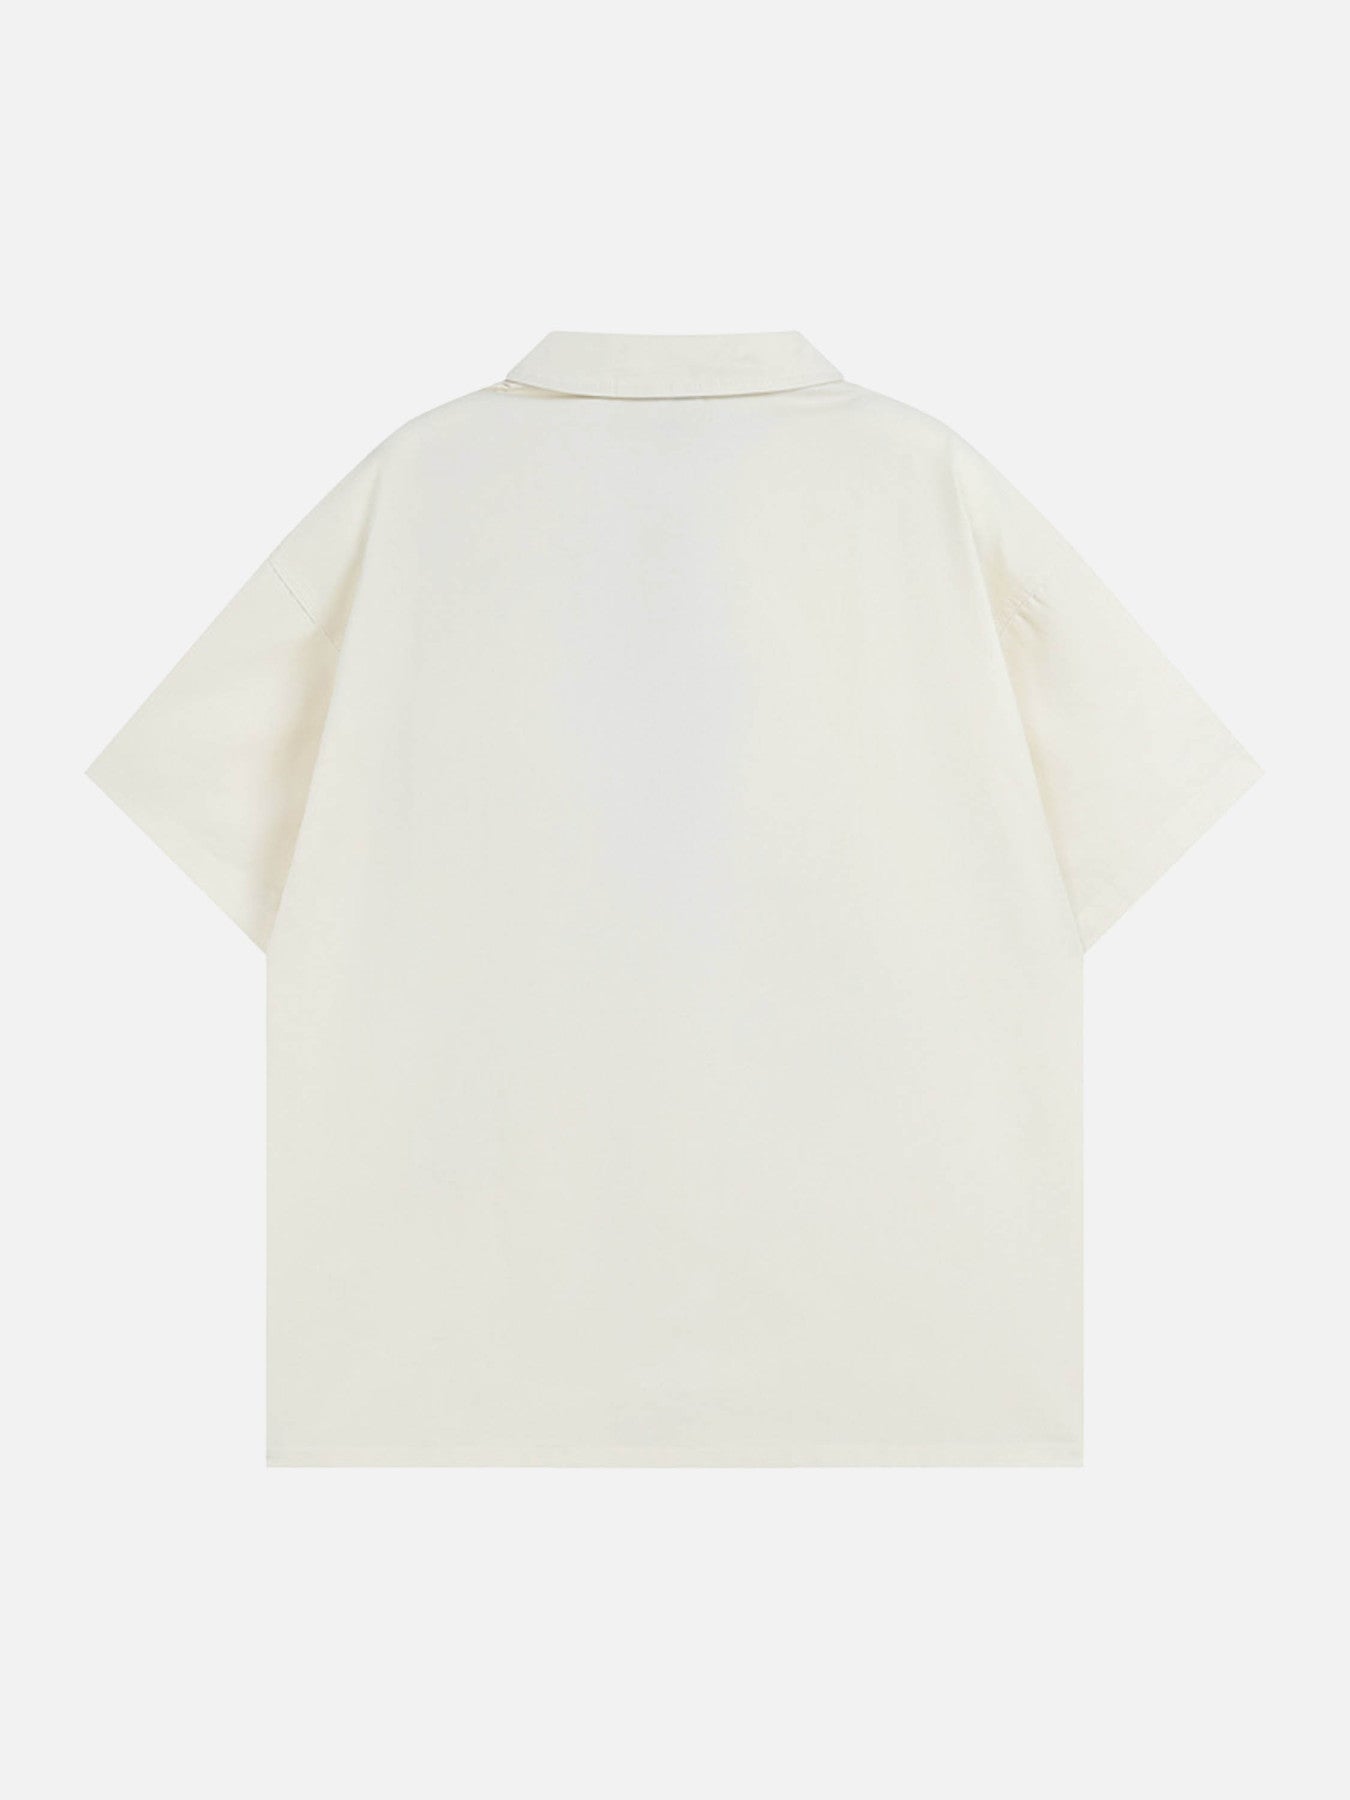 The Supermade Loose And Versatile Short-sleeved Shirt